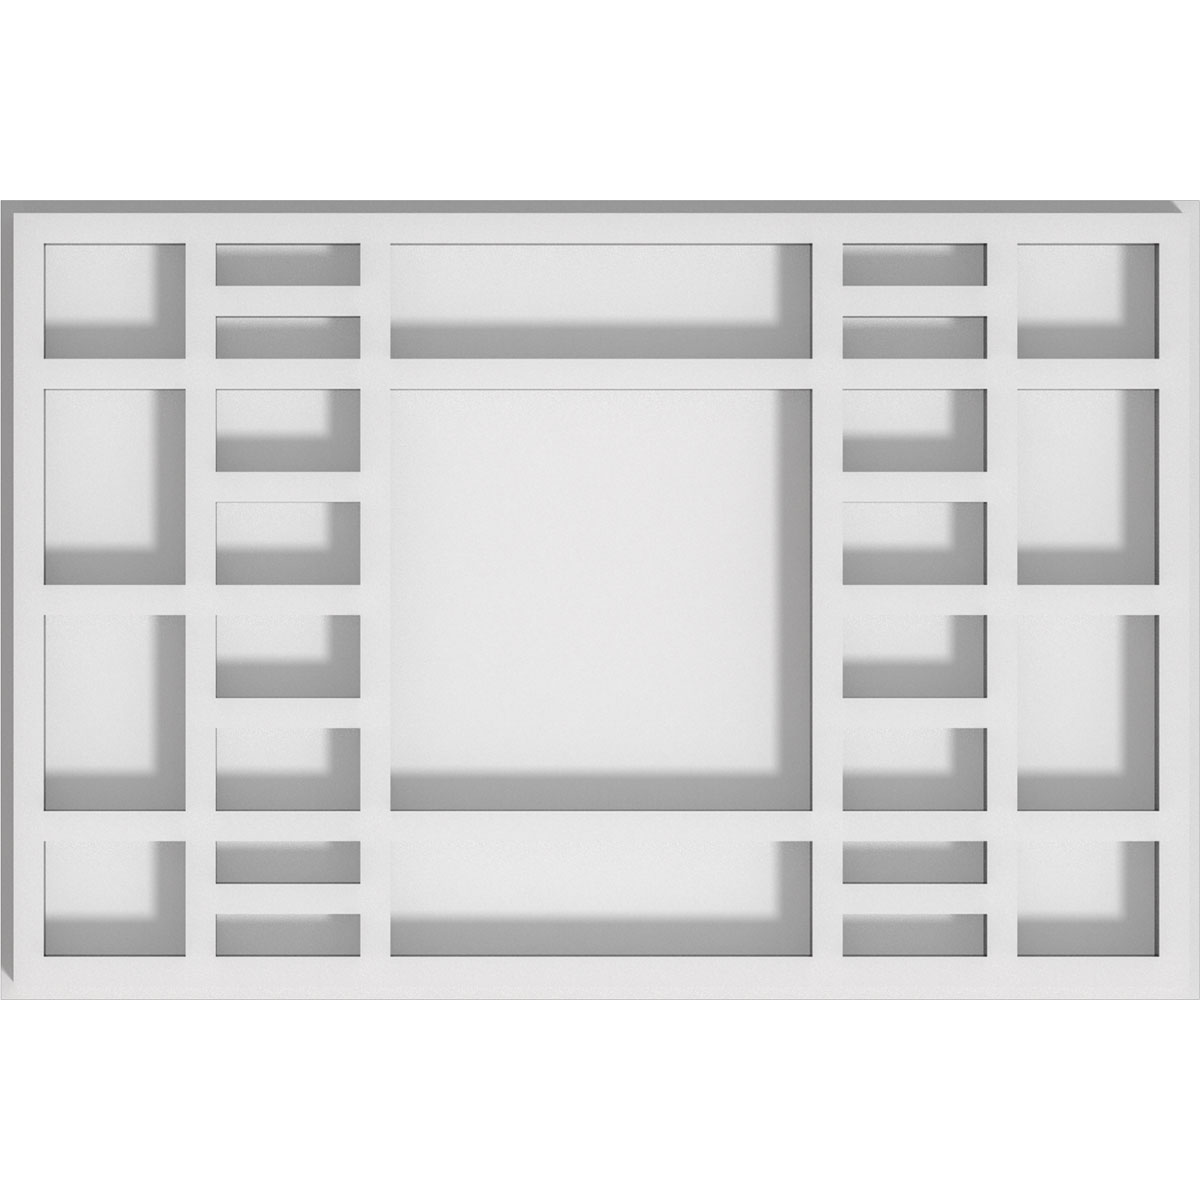 Cmp10x6bx 6.62 X 10 In. Rectangle Beaux Architectural Grade Pvc Contemporary Ceiling Medallion